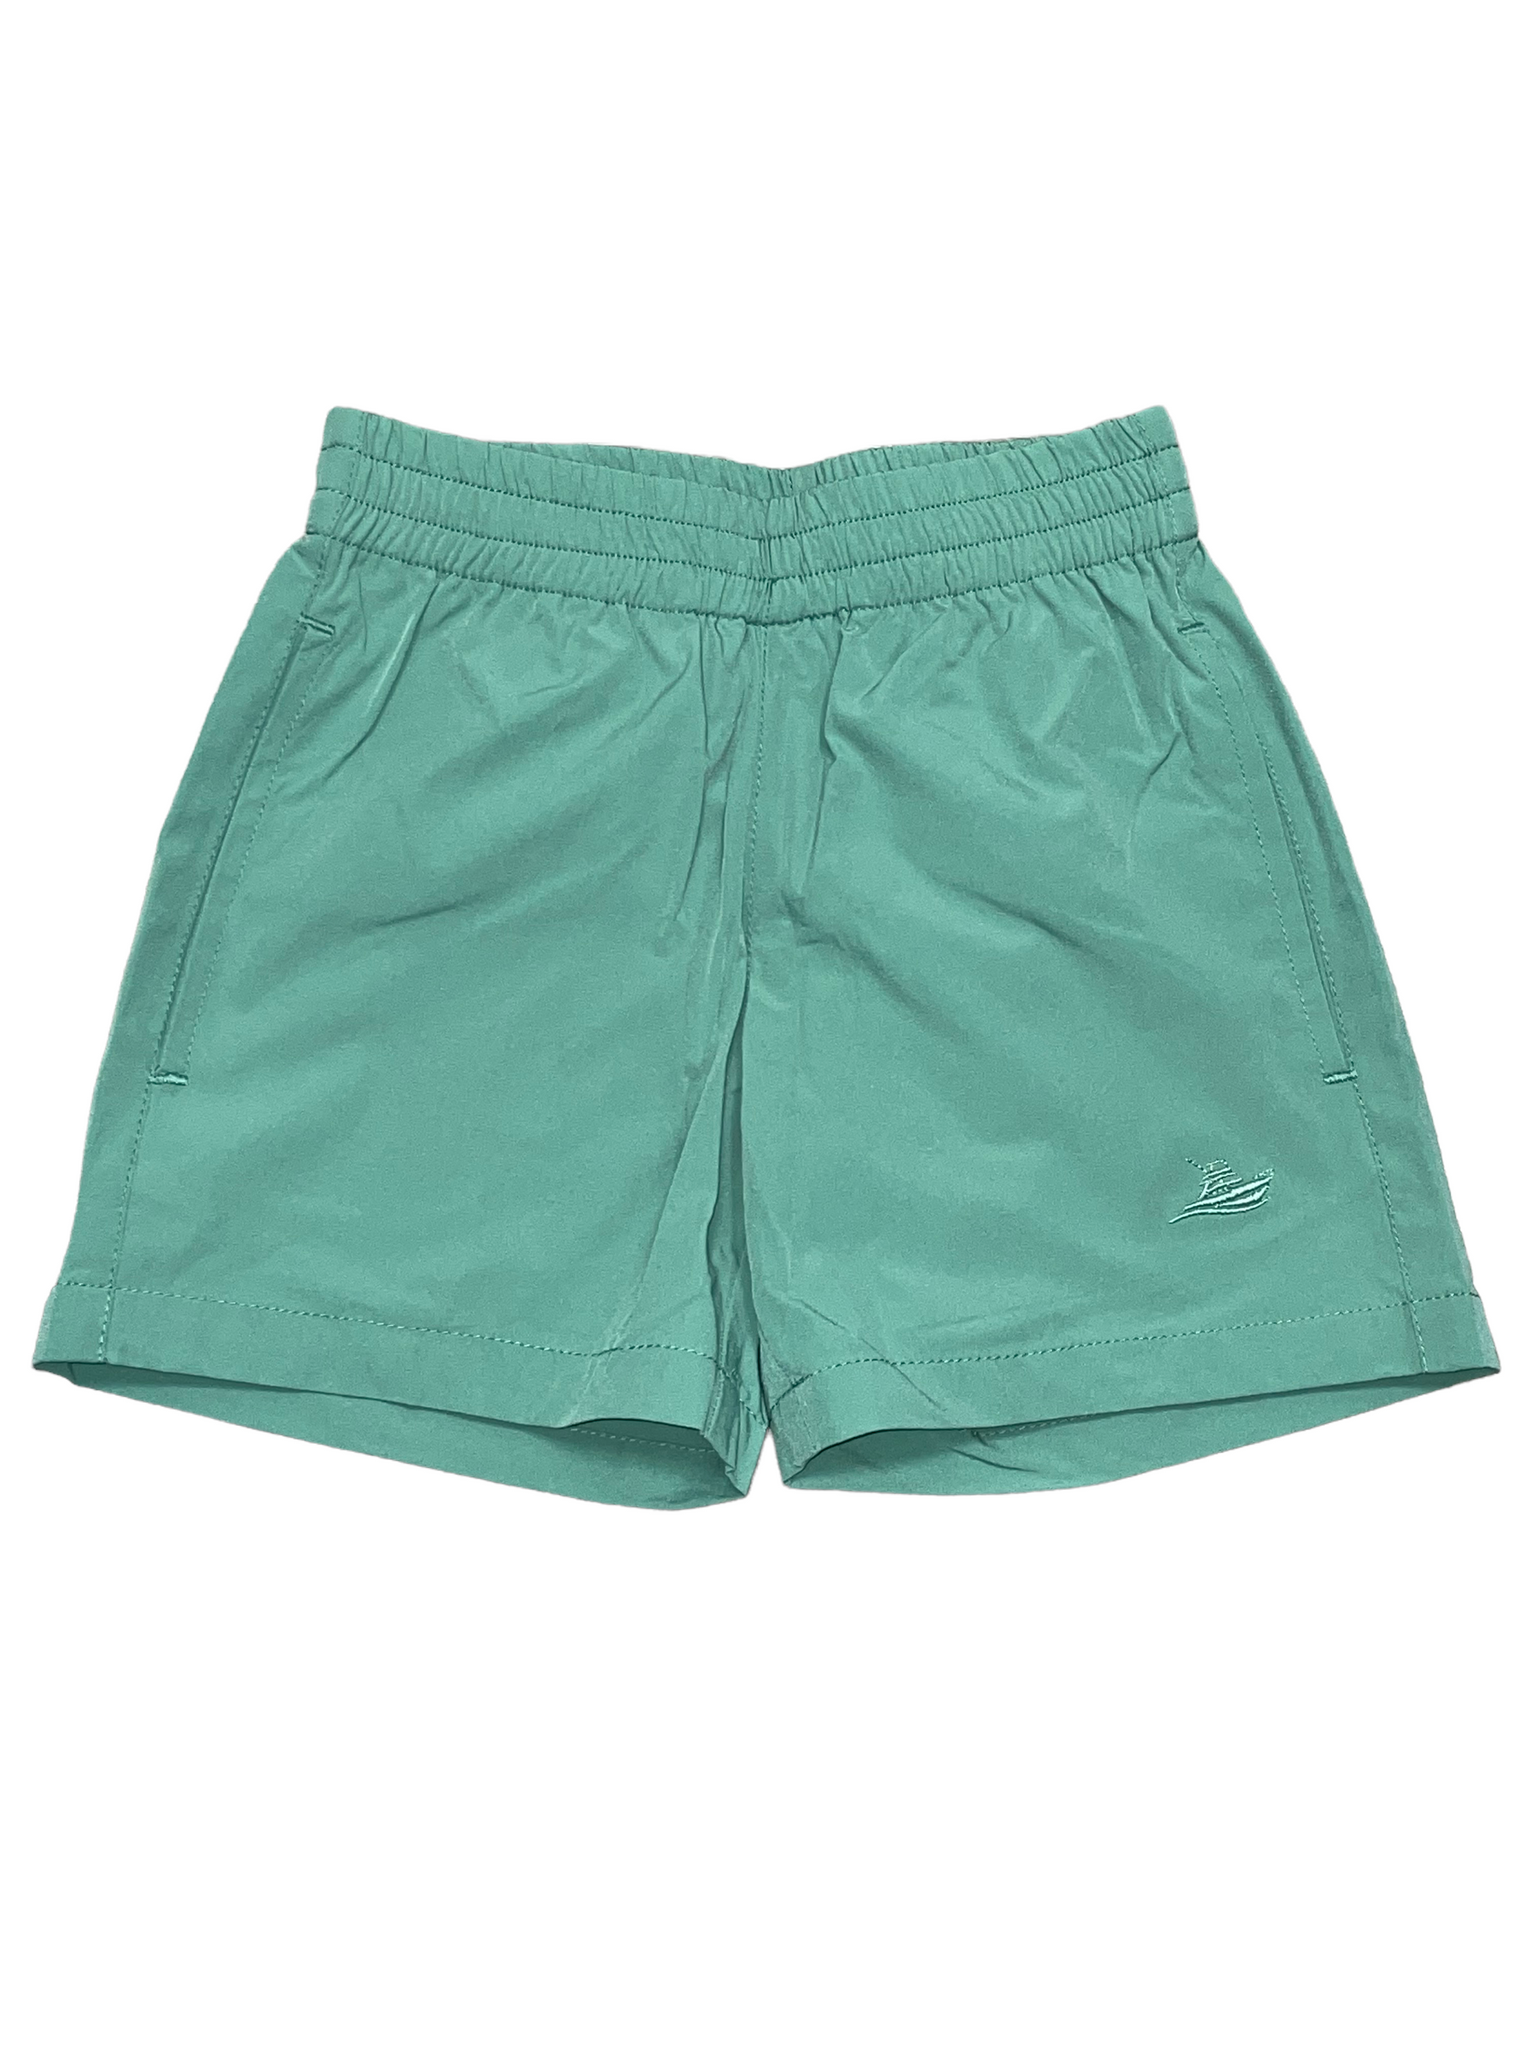 Southbound Performance Play Shorts- Green